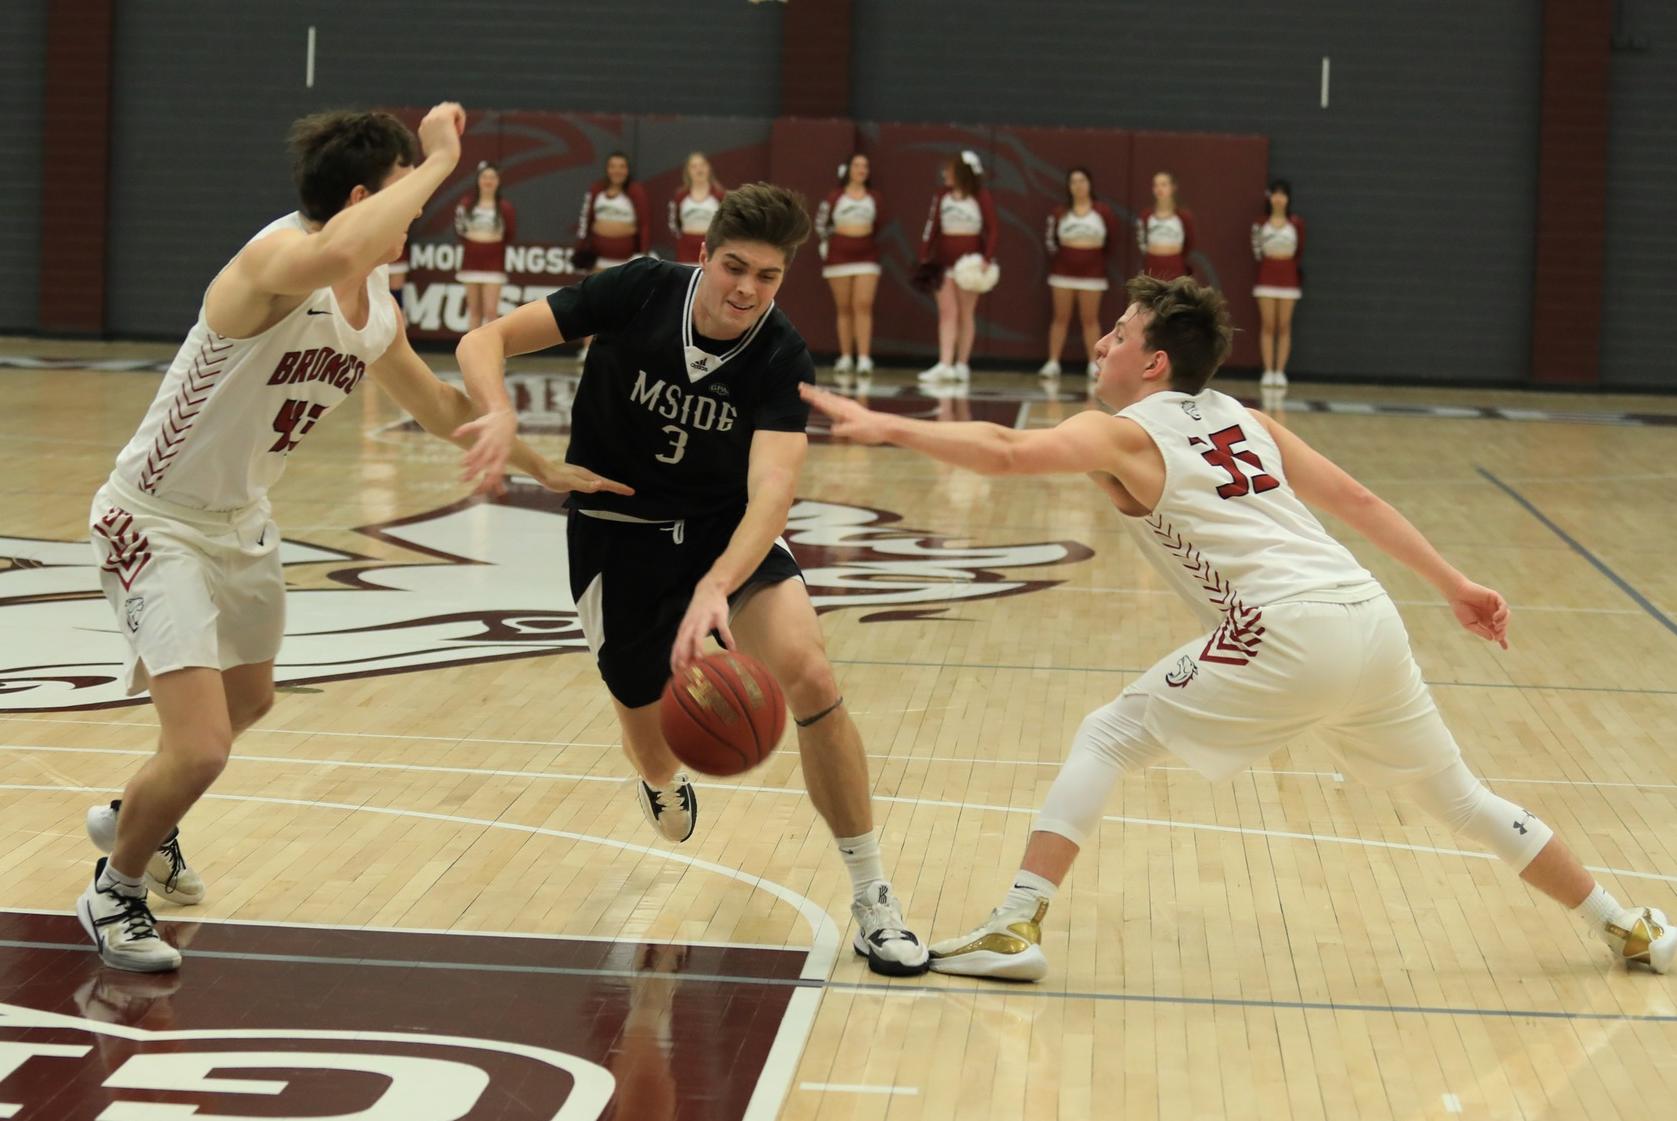 Concordia fast start thwarts Morningside GPAC tourney advancement